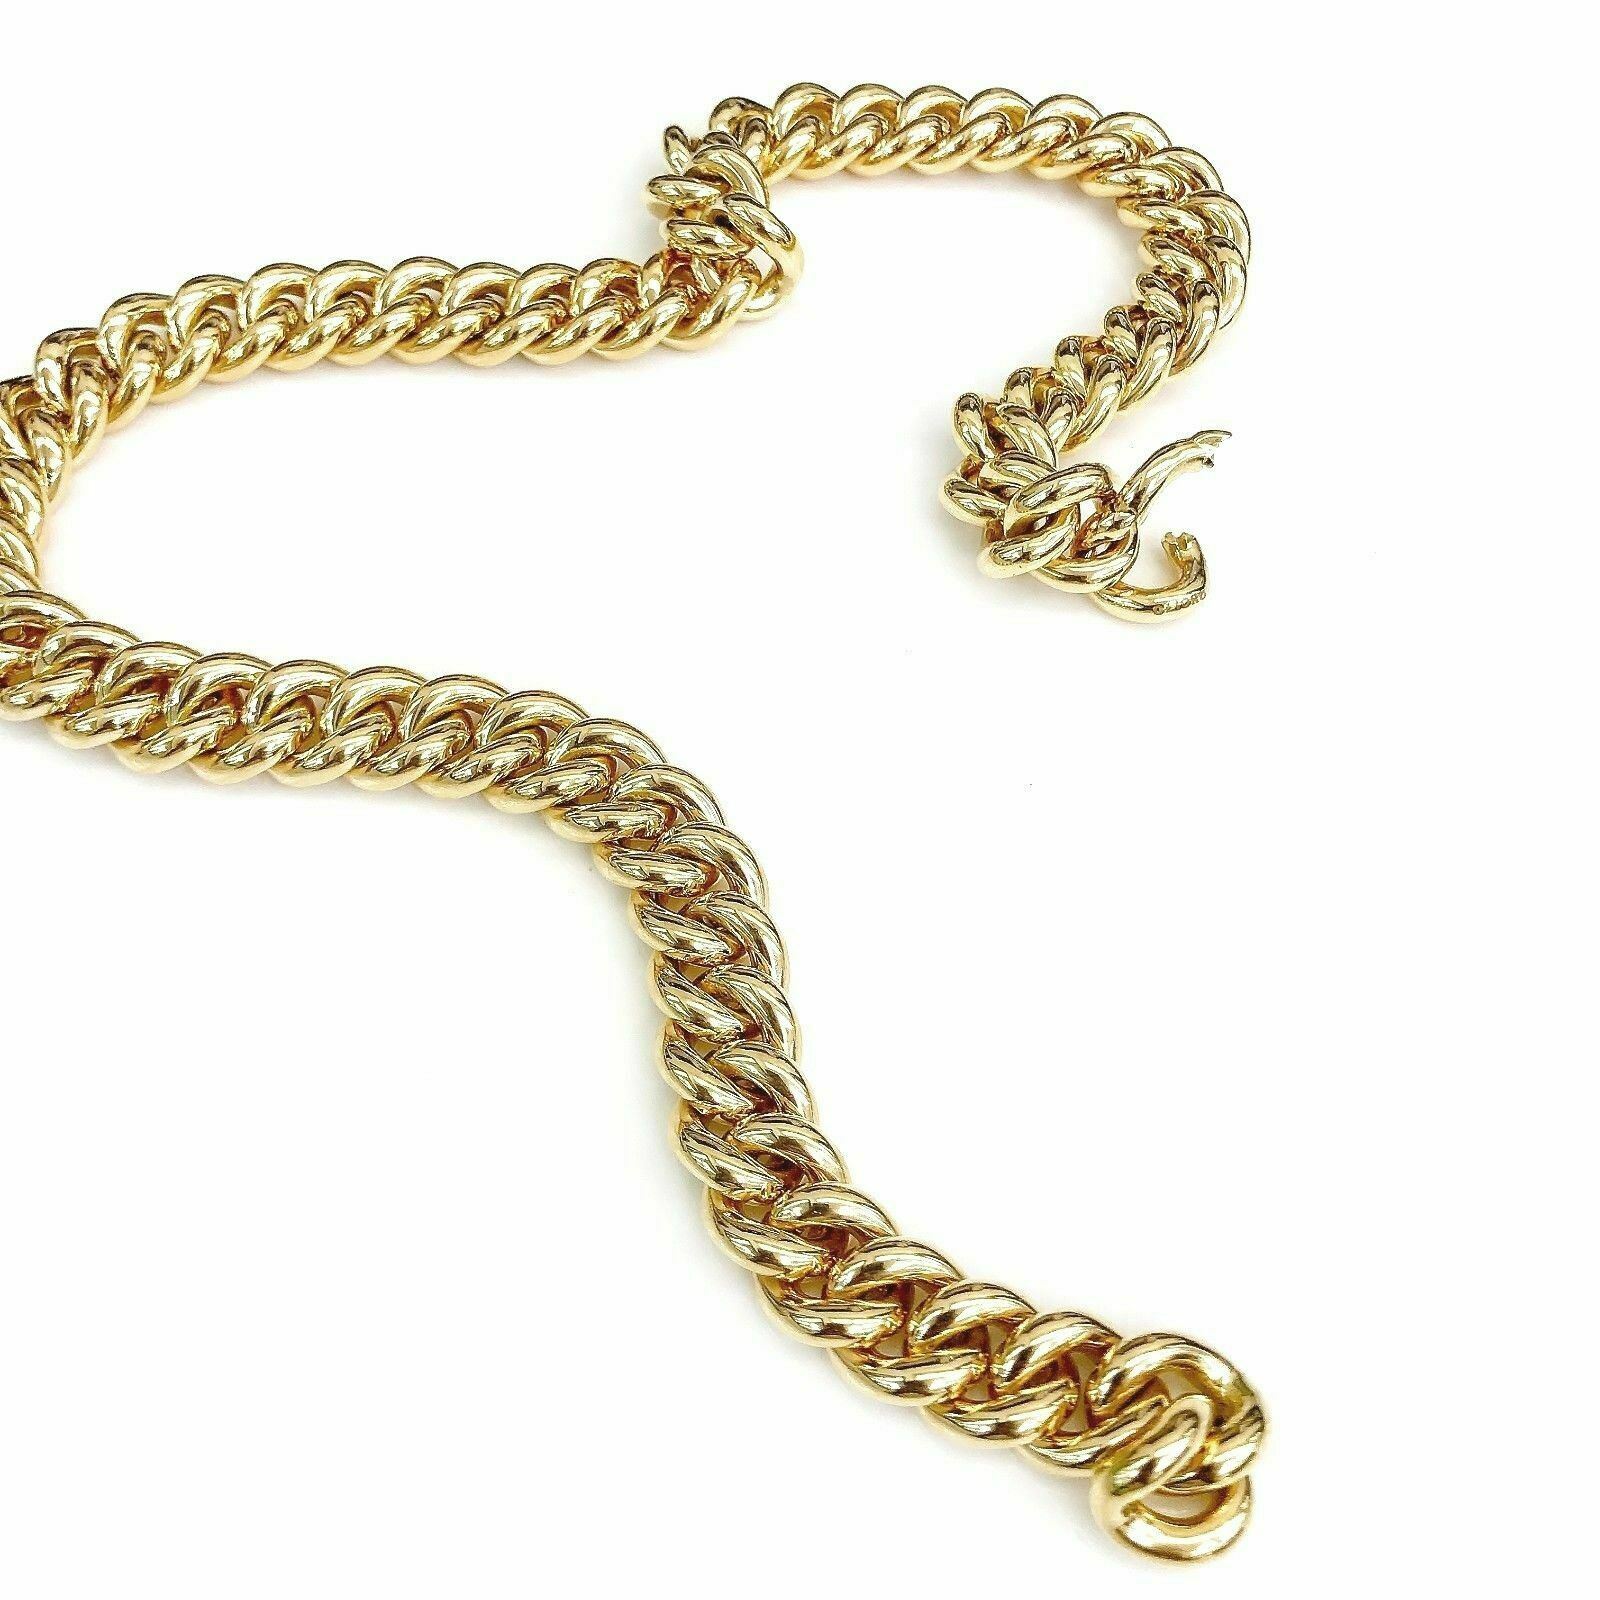 Clioro Solid 18 Karat Yellow Gold Link Necklace 18 Inch 3.64 Ounces 0.50 In Wide